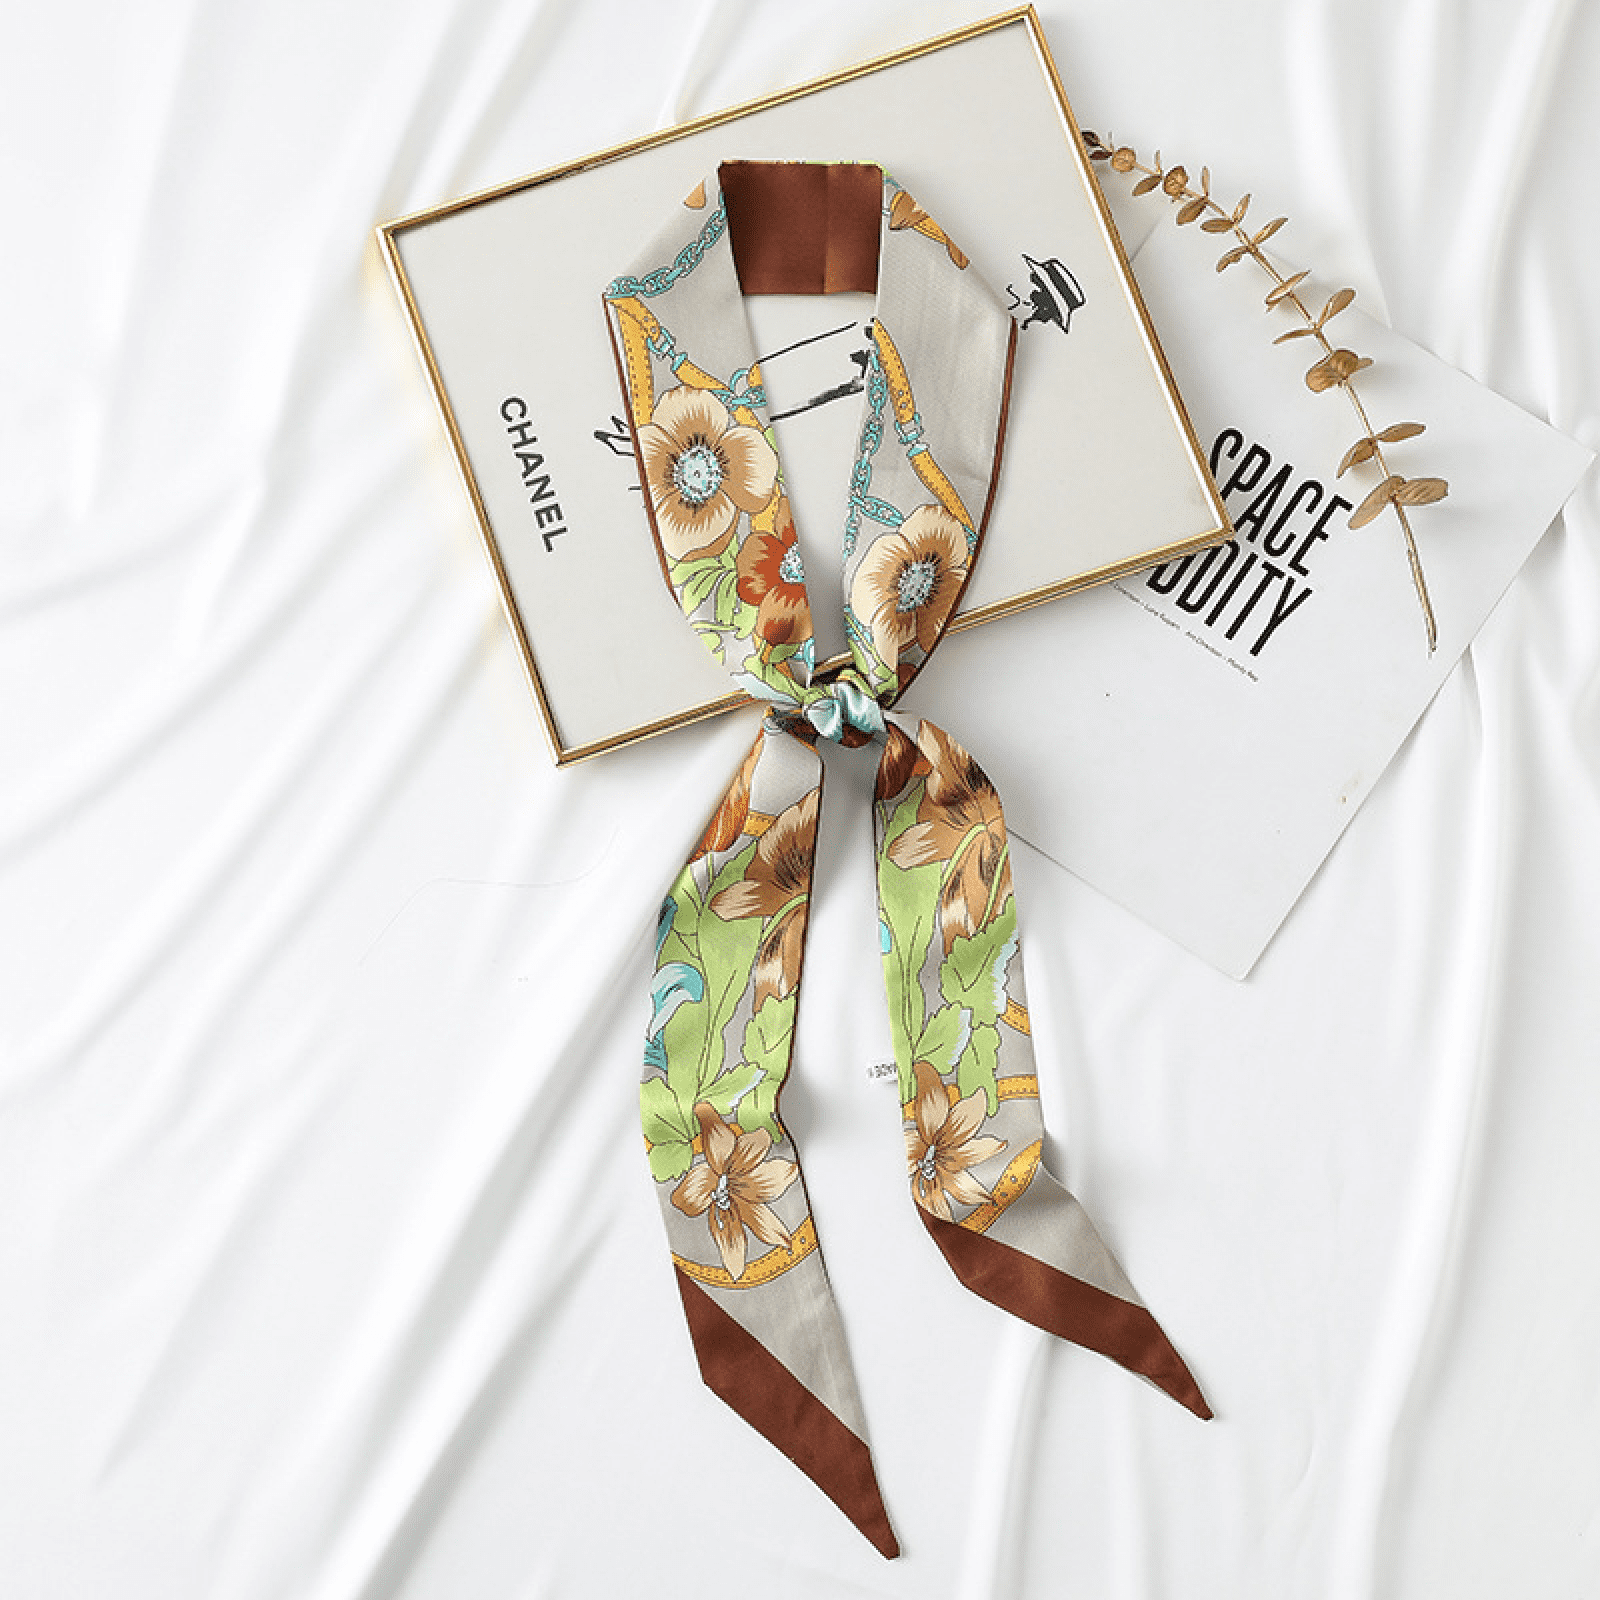 YIUWLMN 2Pcs Silk Scarf Buckle, Small Square Scarf Buckle,Scarf buckle  ring, Decorations for Scarves, Shawls and Clothes